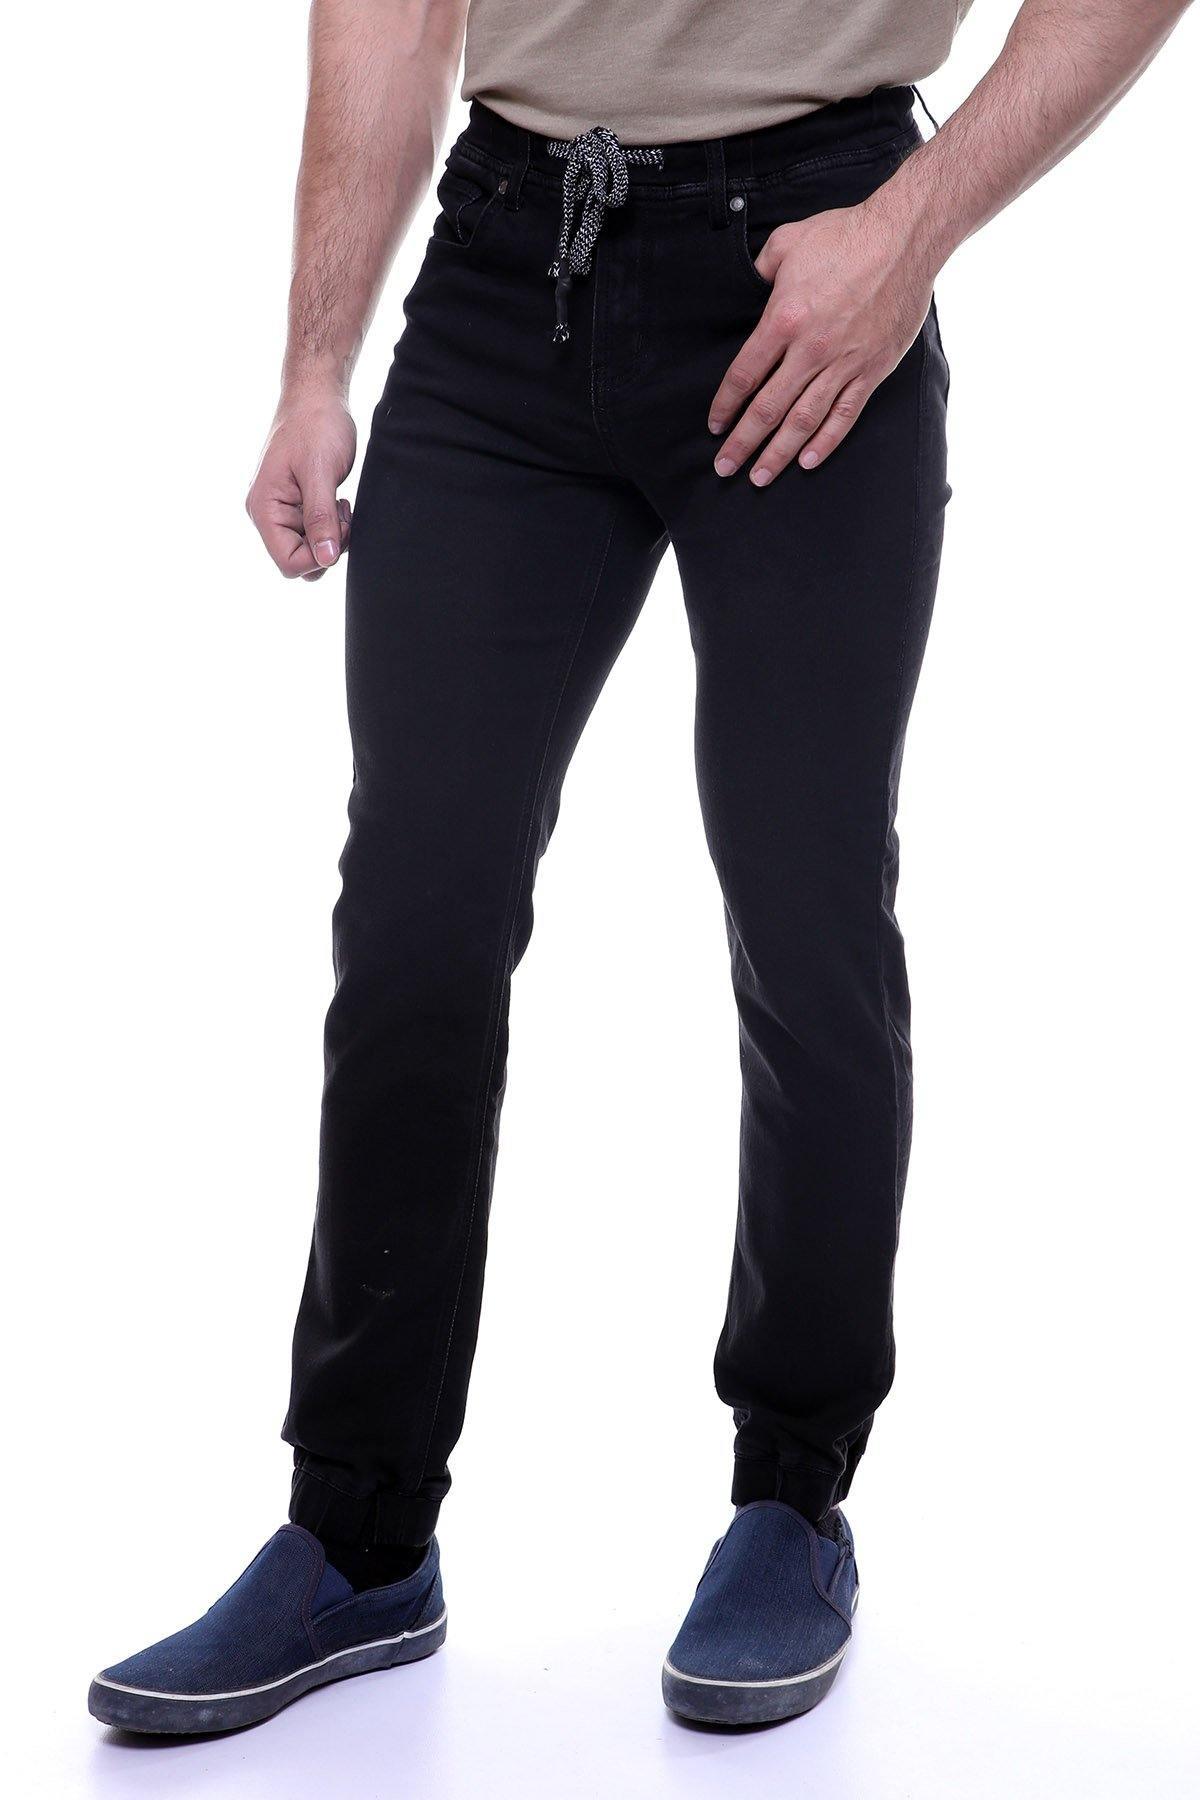 Jeans Trouser 5 Pocket Black at Charcoal Clothing